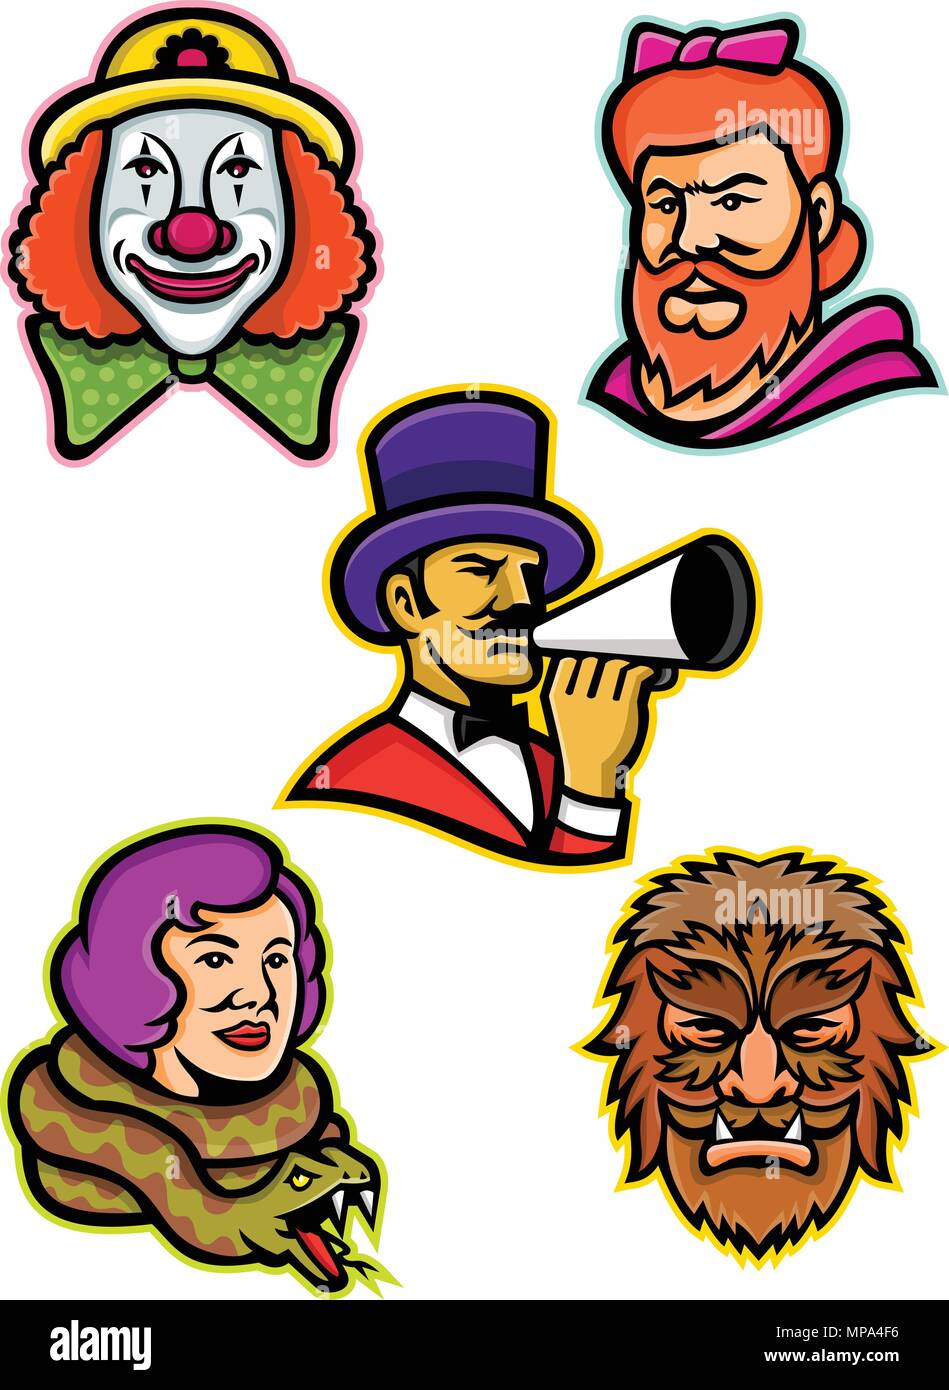 Mascot icon illustration set of heads of circus performers and freaks like the bearded lady or woman, wolfman or wolfboy, snake lady or charmer, circu Stock Vector